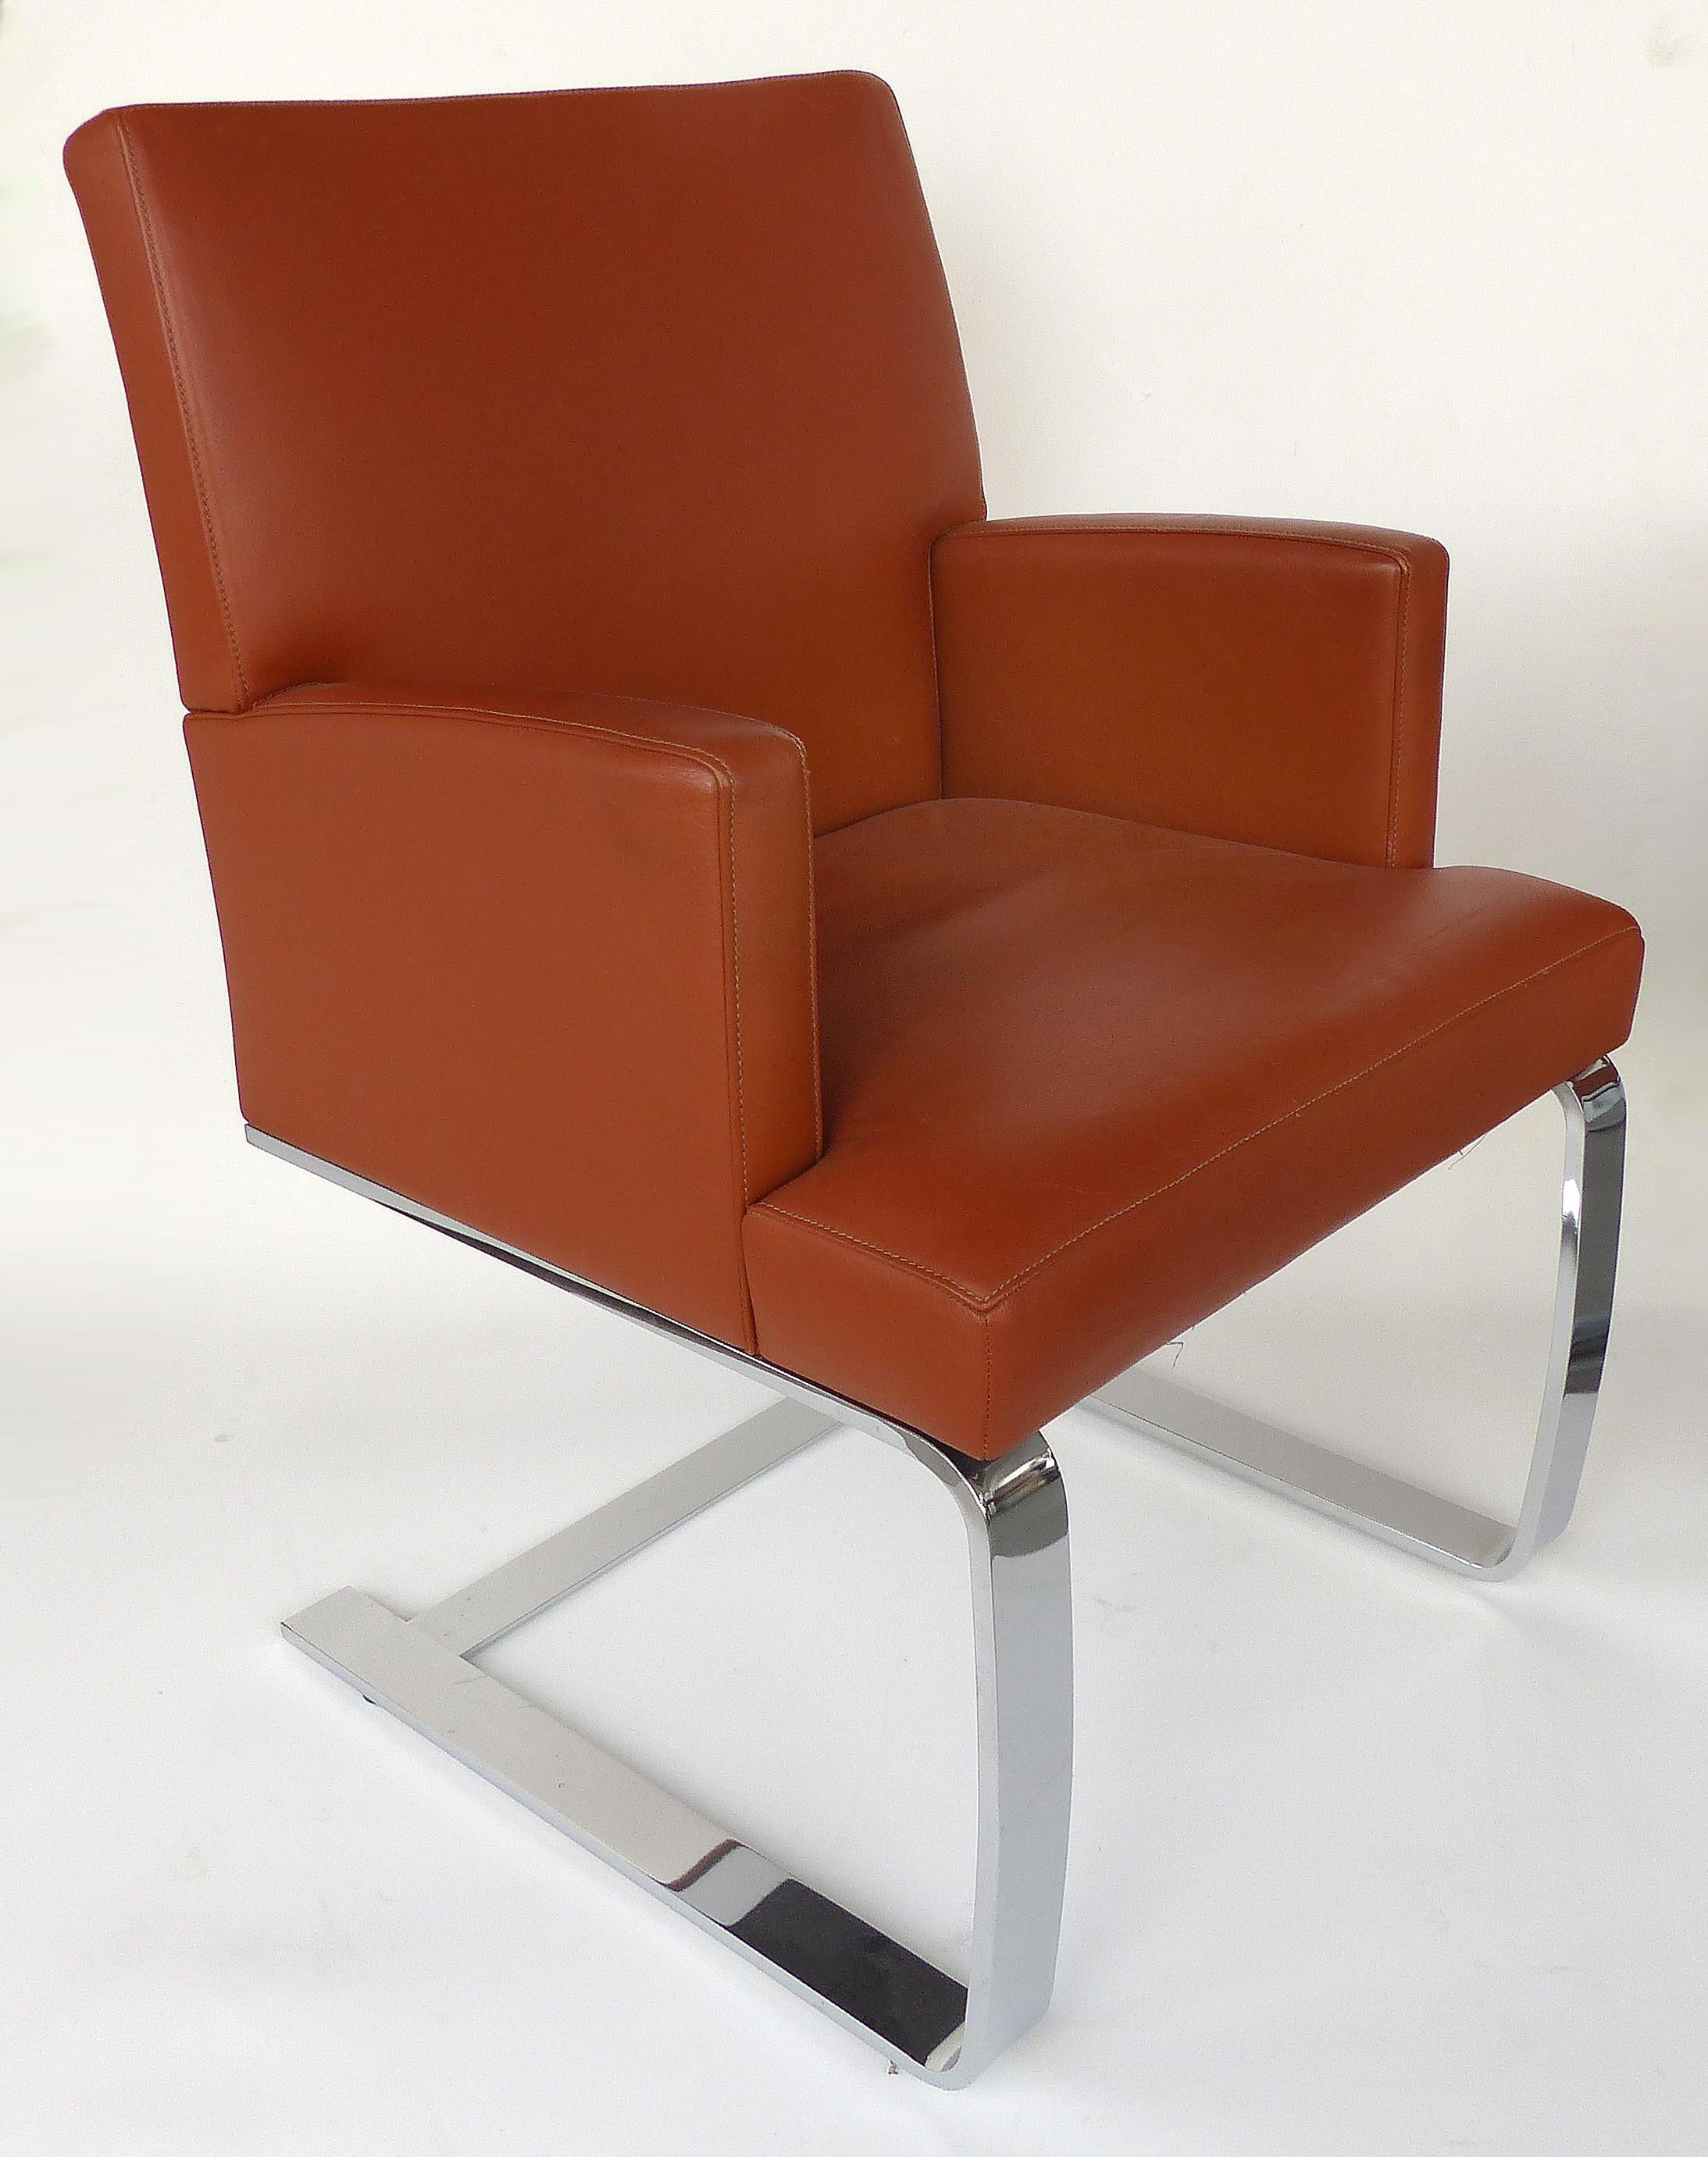 Mid-Century Modern De Sede of Switzerland Cantilevered Leather and Stainless Steel Chairs, '4'